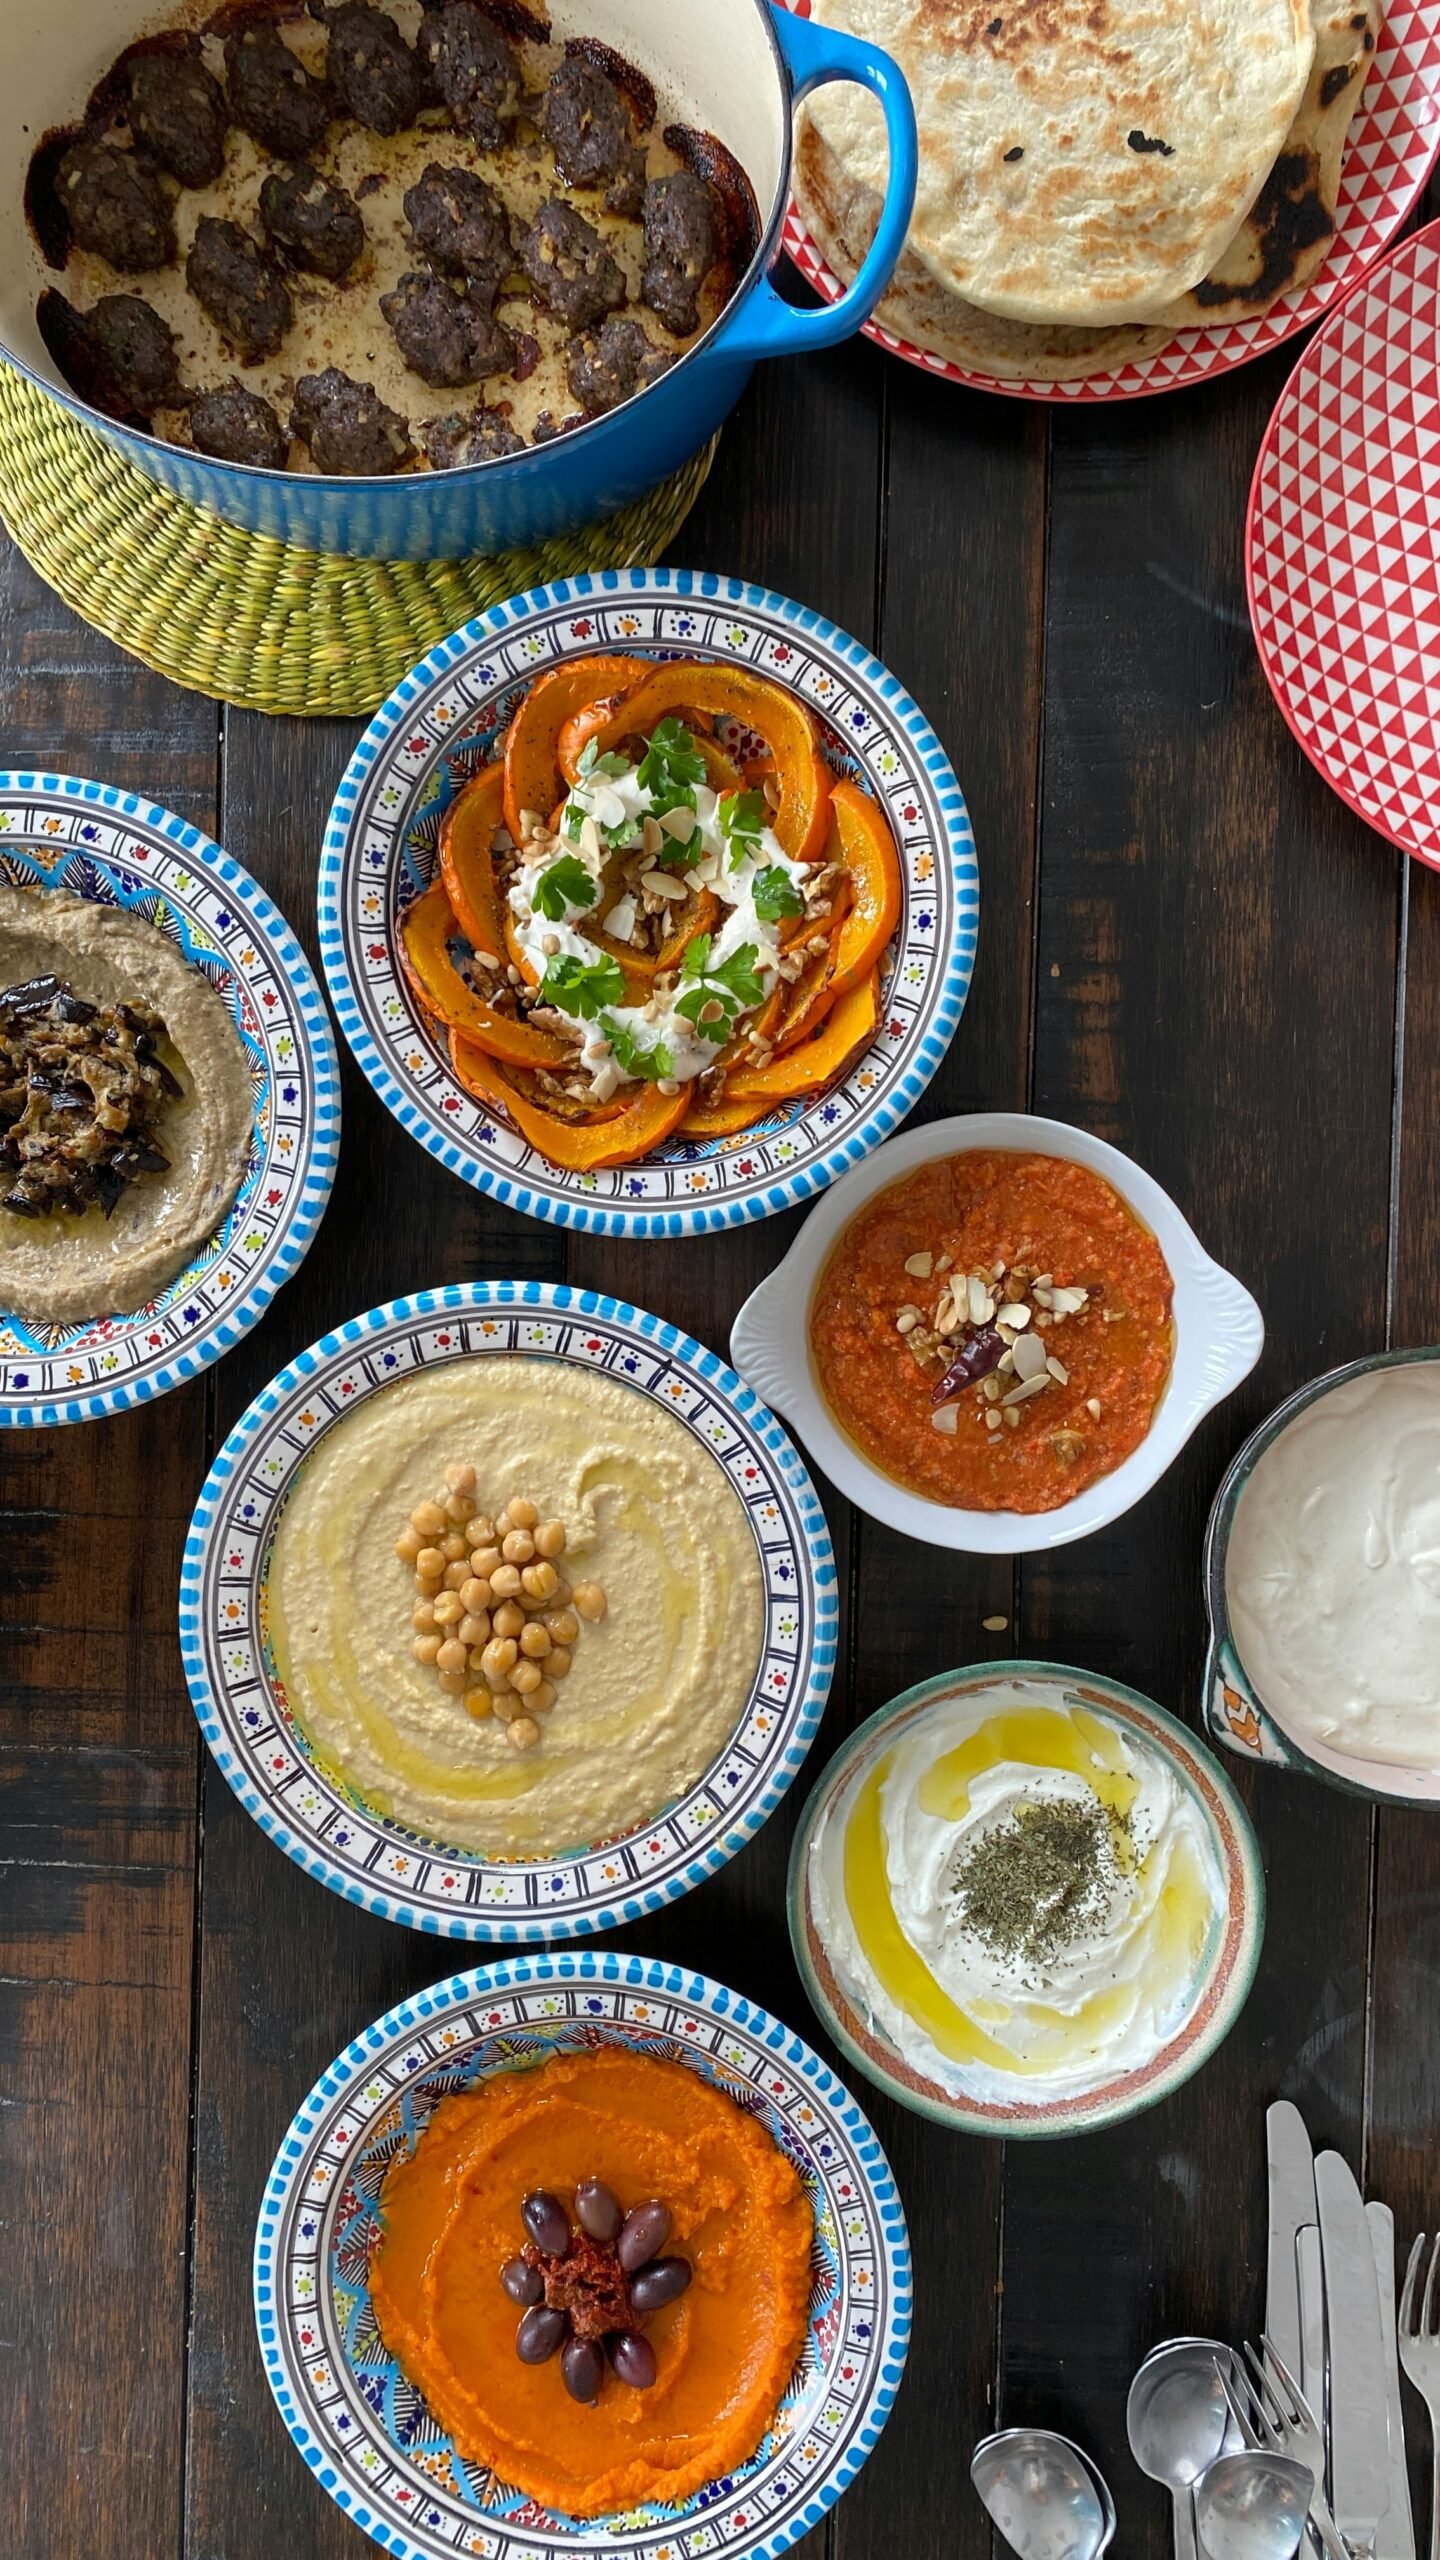 Mouthwatering Mezze: Local Cuisine and Restaurant Recommendations in the Middle East